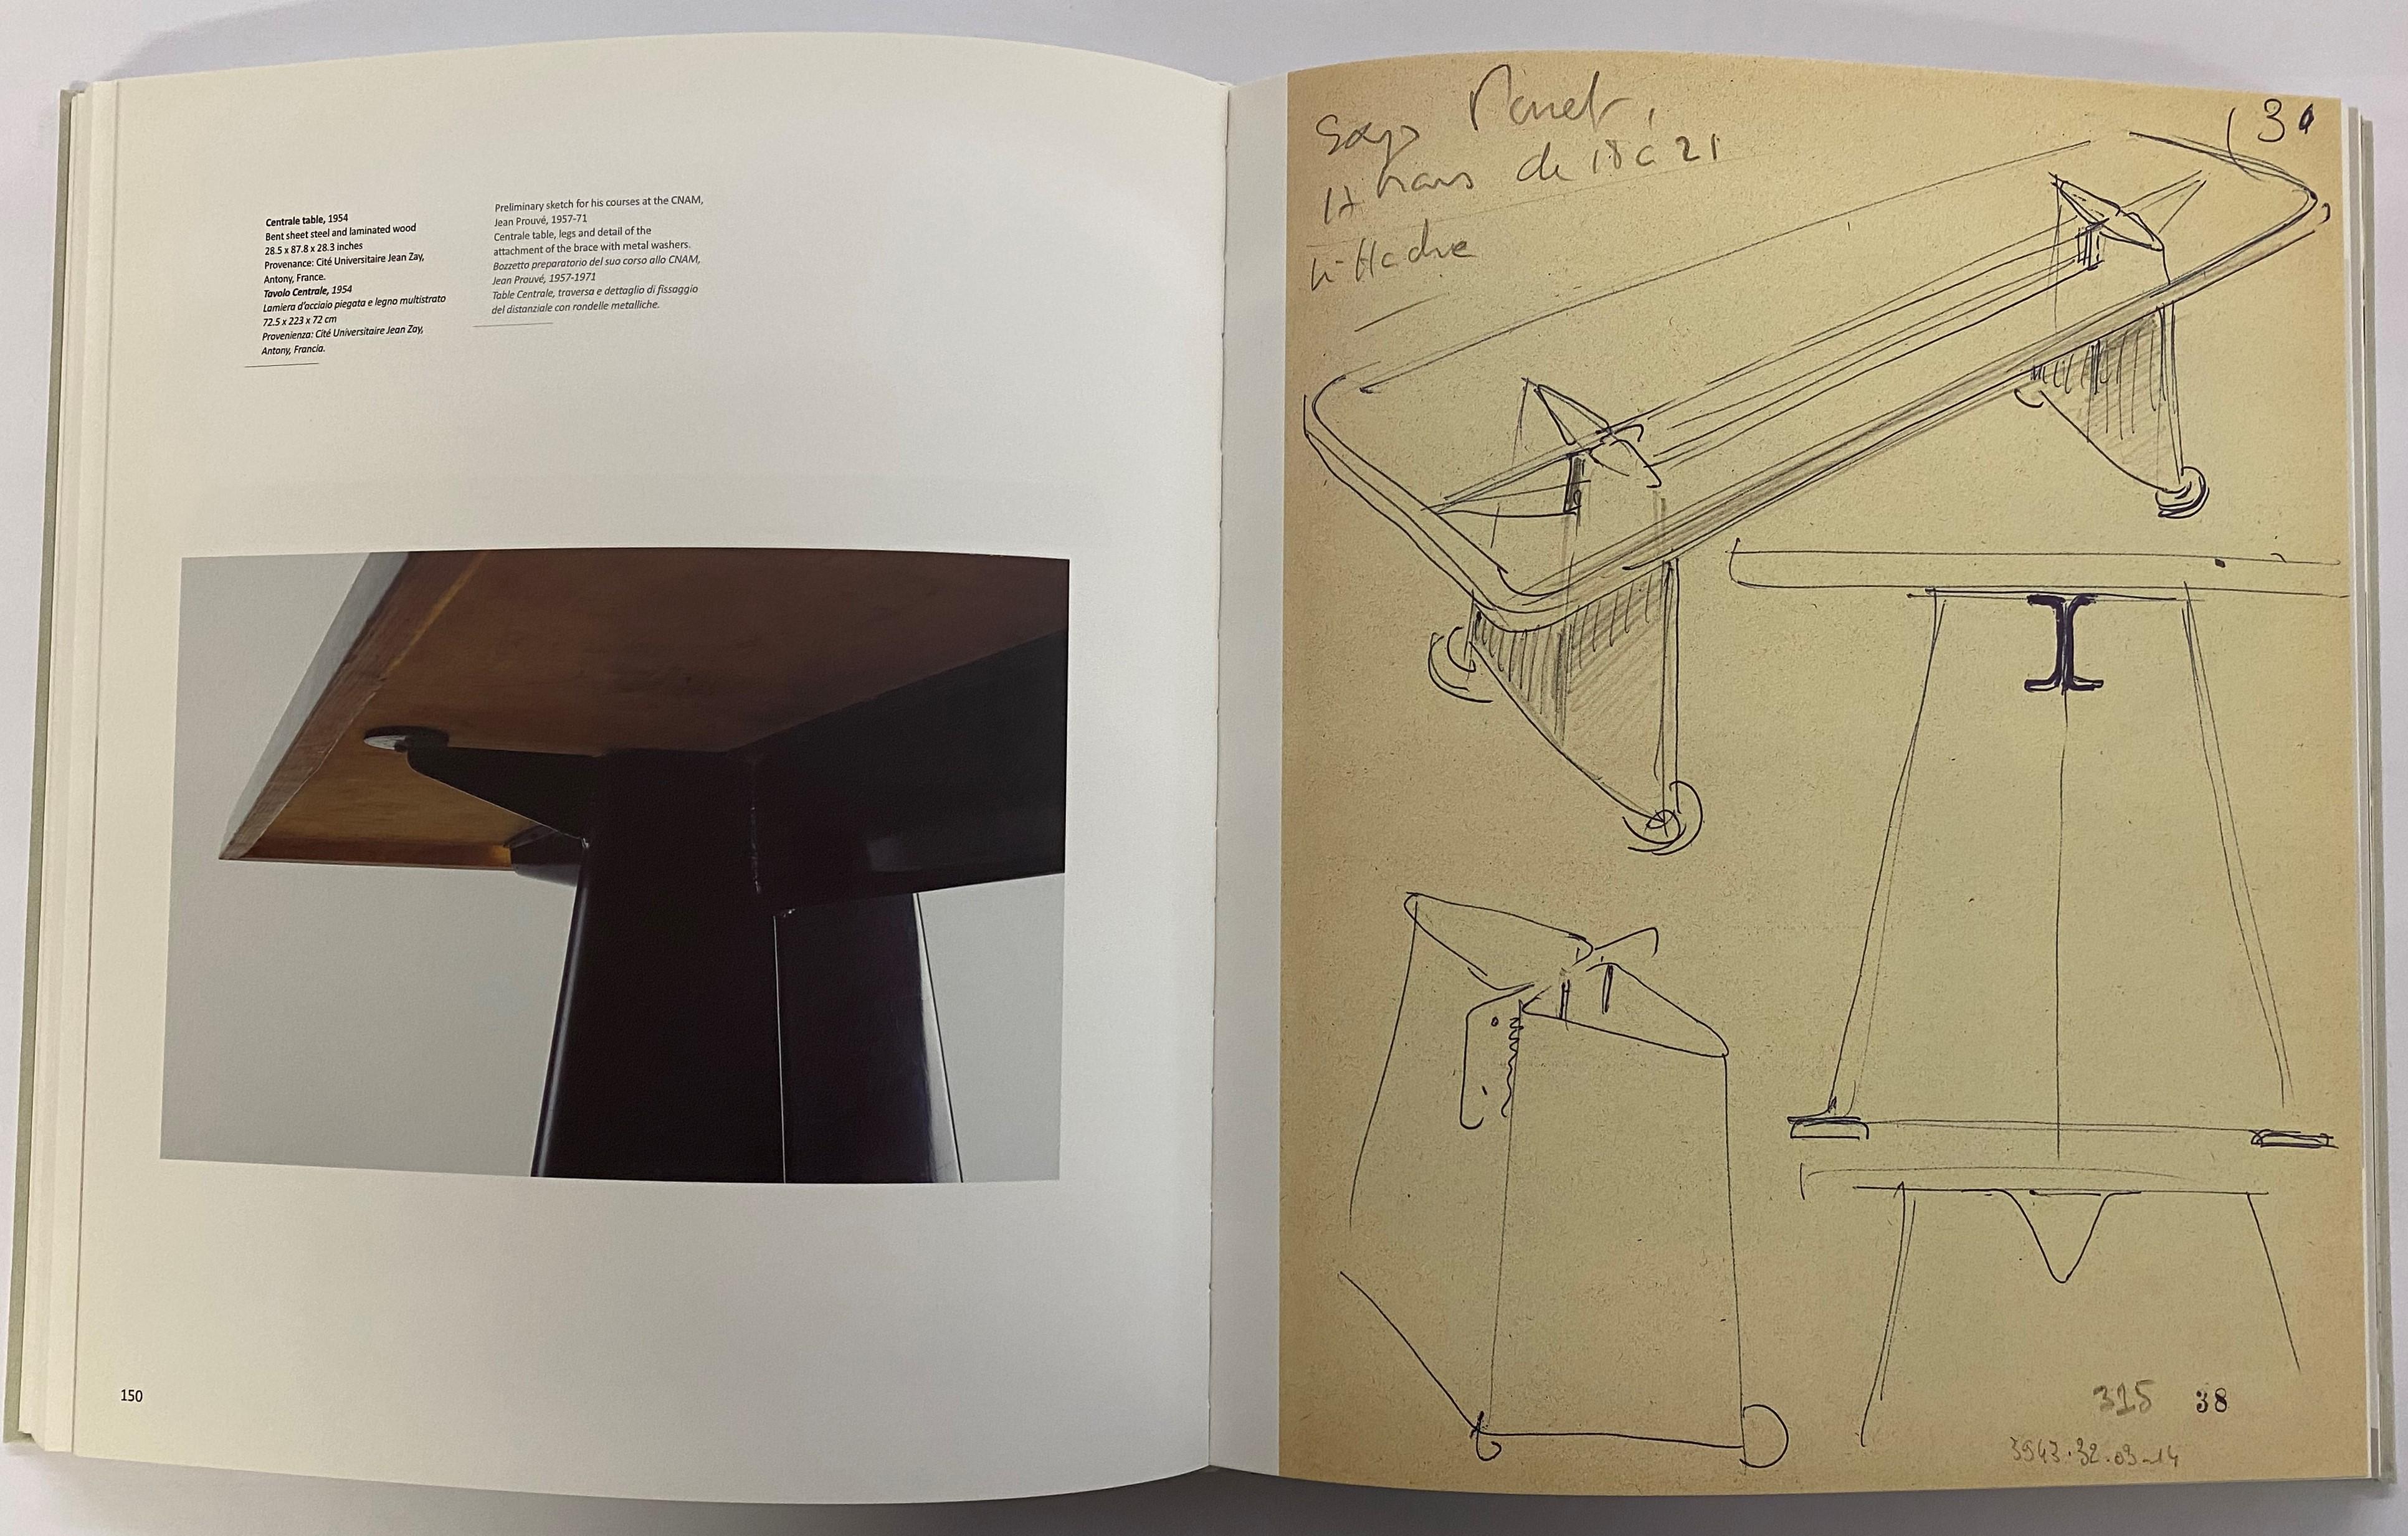 A Passion For Jean Prouve: From Furniture to Architecture (Buch) im Angebot 4